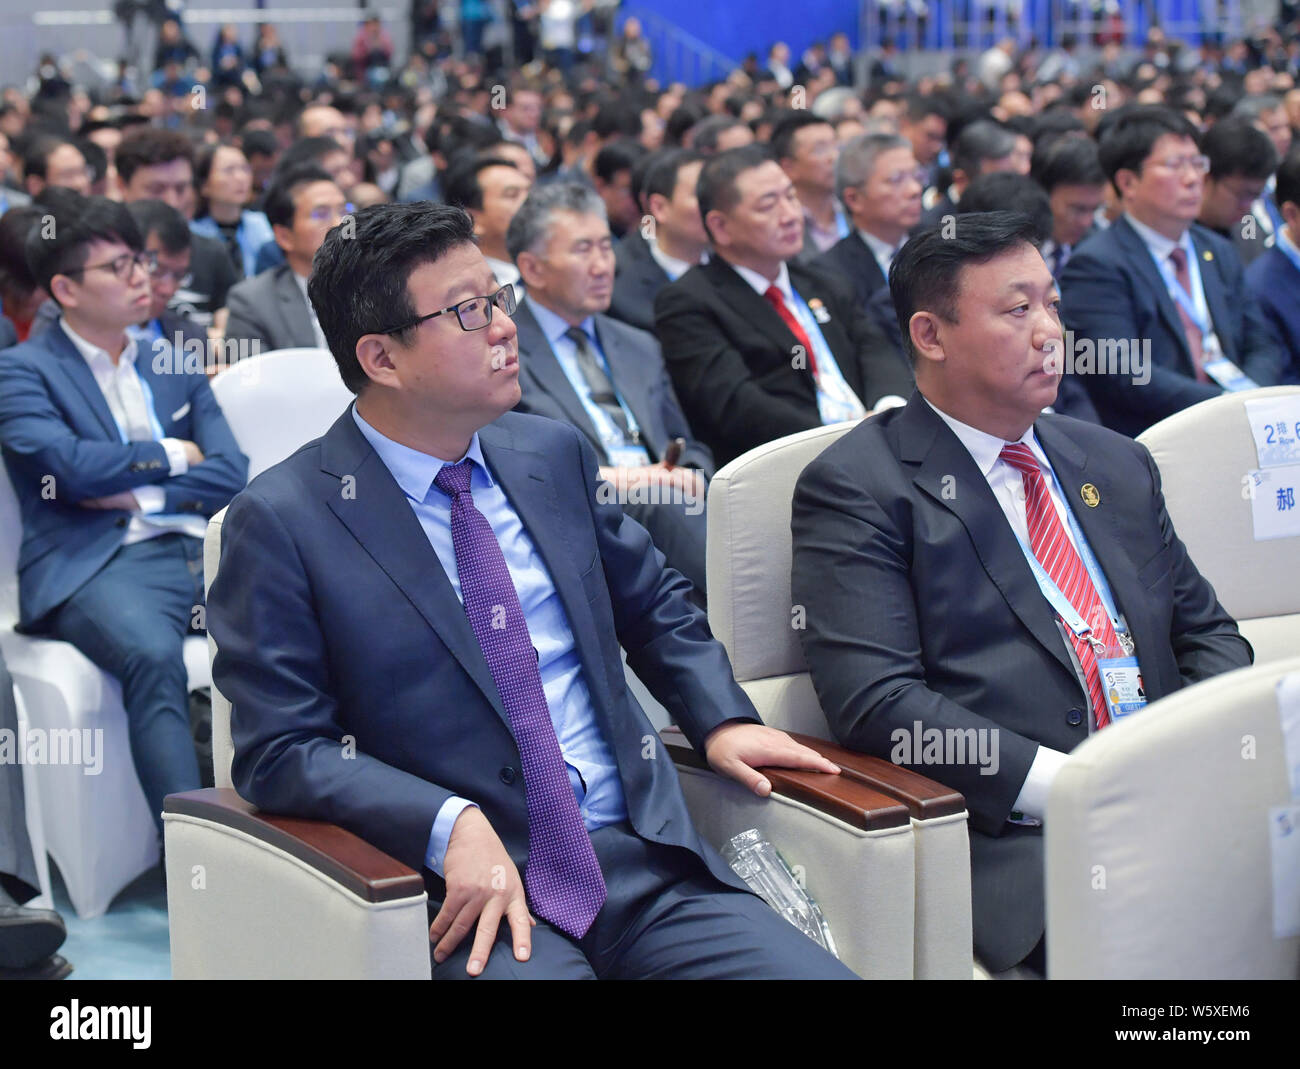 William Ding or Ding Lei, CEO of Netease (163.com), attends the opening ceremony for the 5th World Internet Conference (WIC), also known as Wuzhen Sum Stock Photo